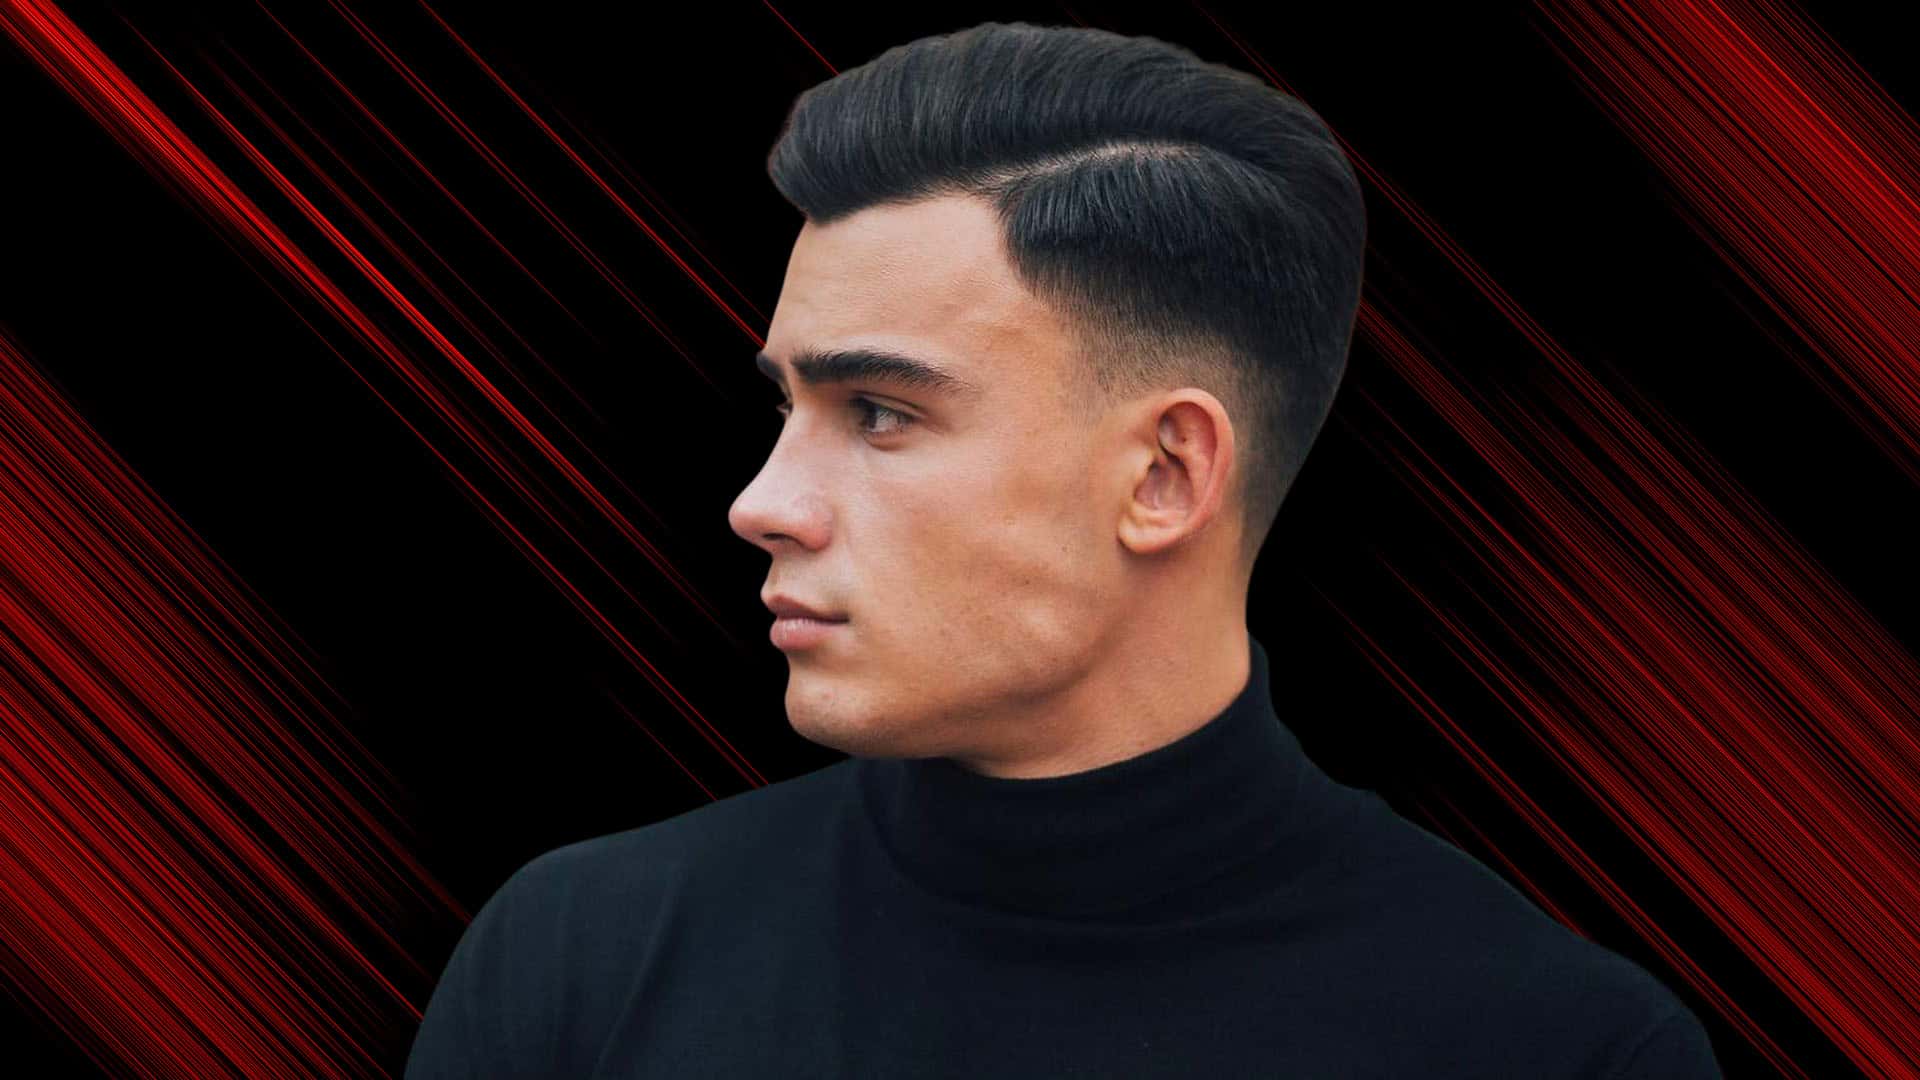 Low Taper Fade Haircuts: 16 Of The Coolest Styles For 2023